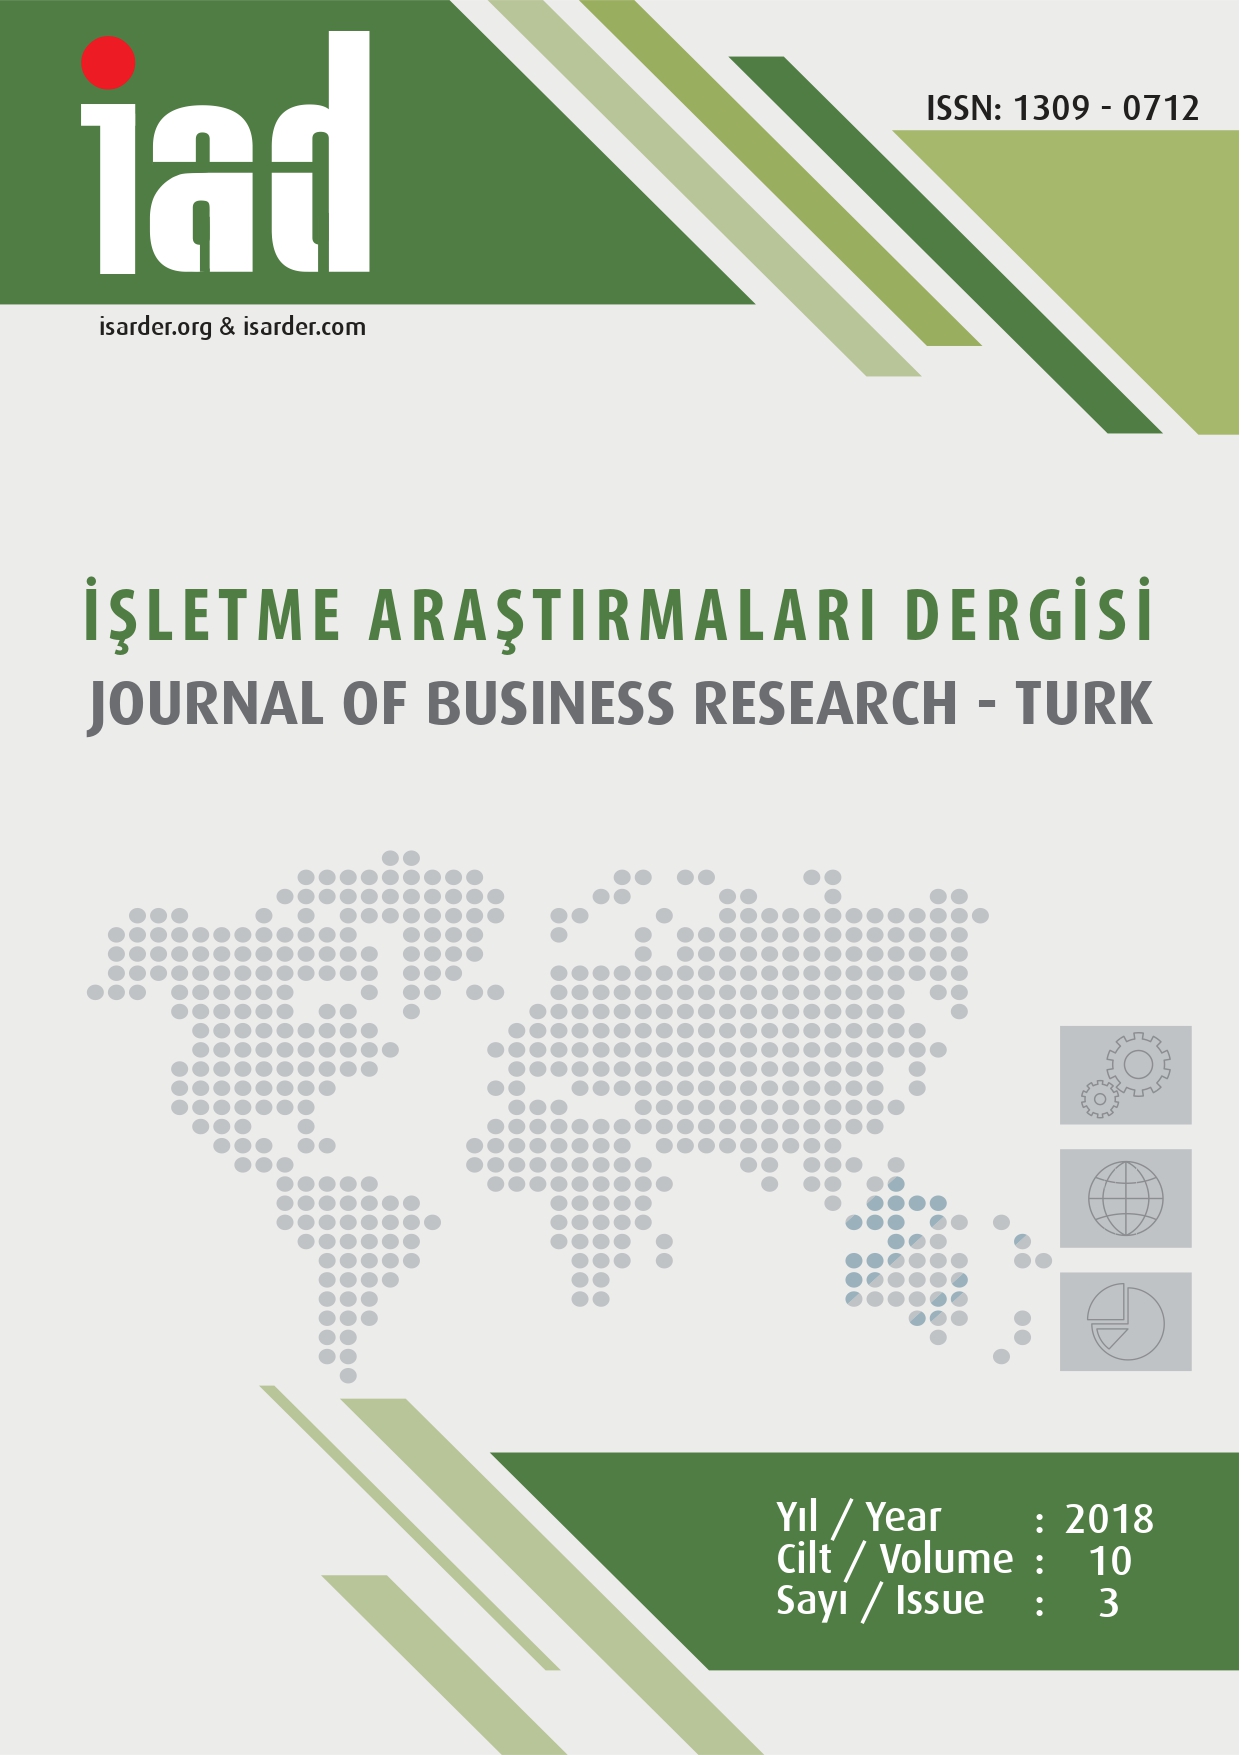 A Financial Analysis of the Liquidity Creation and the Capital Holdings of Turkish Banks